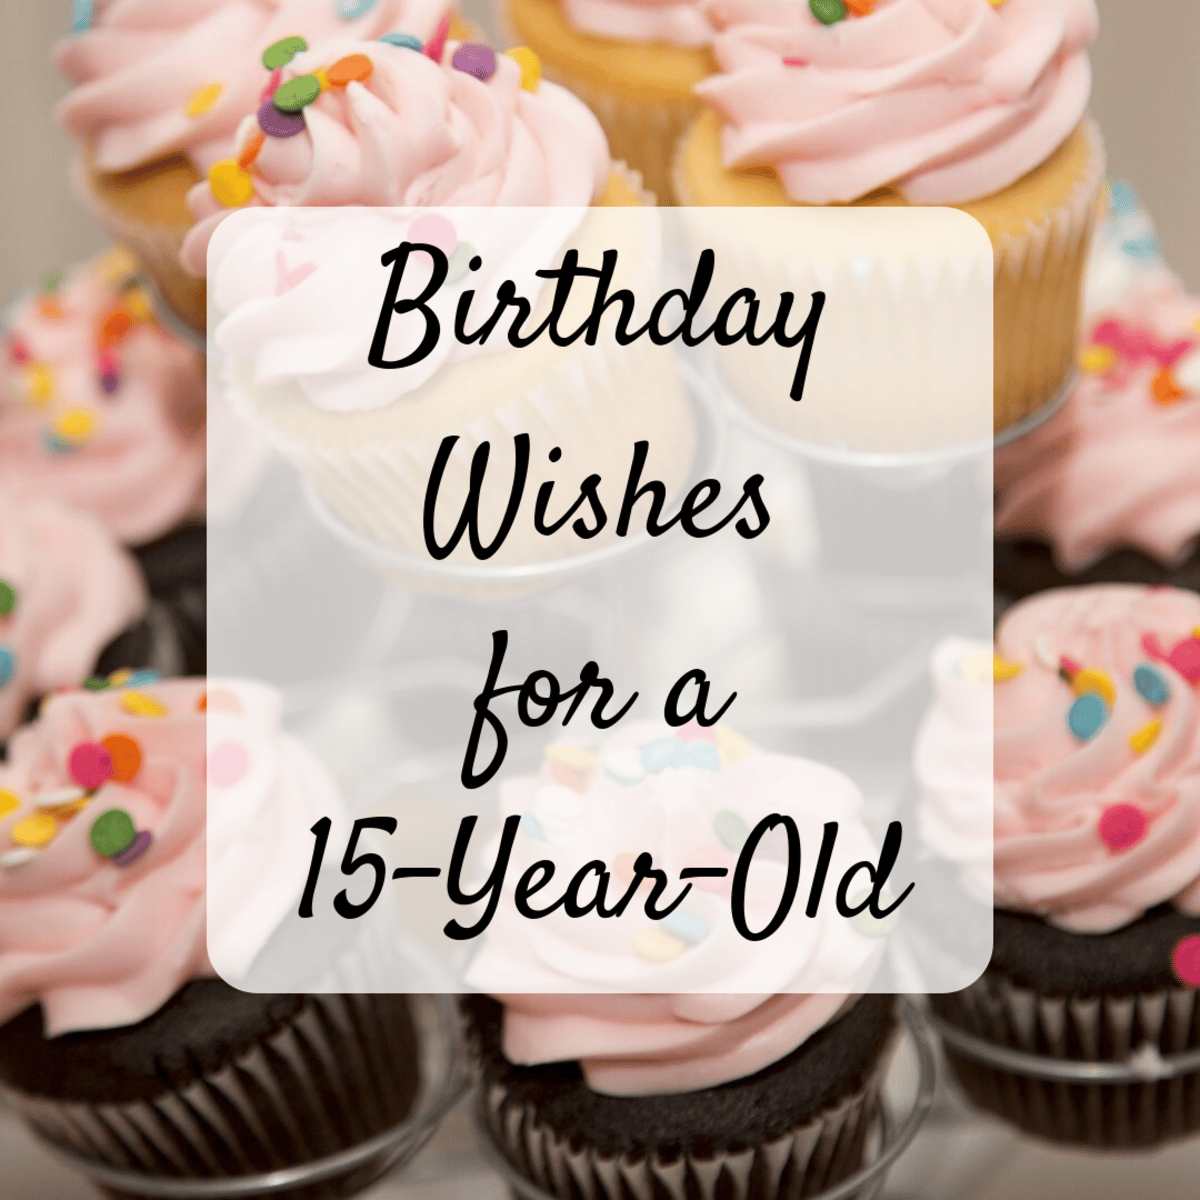 Happy 15th Birthday: Wishes, Messages, and Quotes for a 15